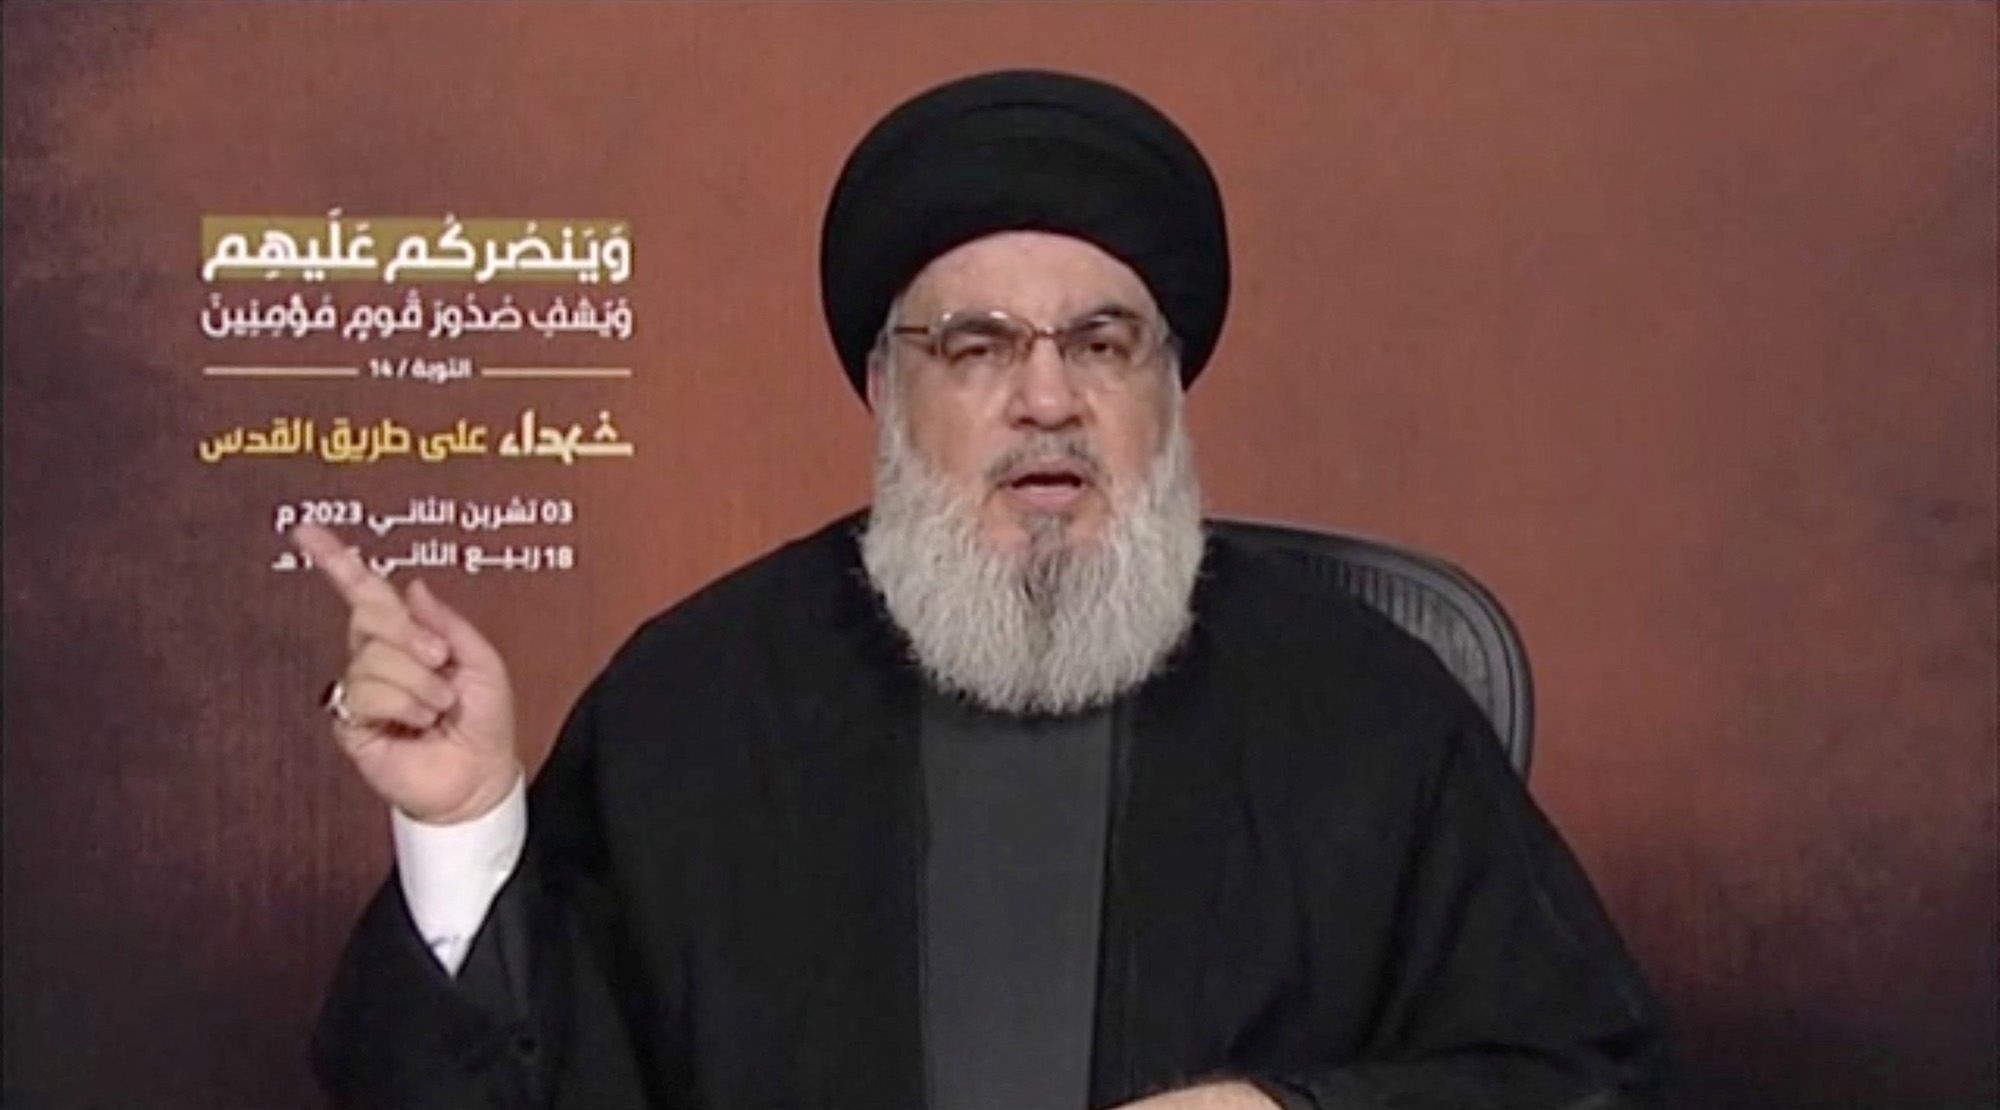 Hezbollah leader Sayyed Hassan Nasrallah delivers a speech from an unspecified location in Lebanon, in this screenshot taken from video obtained on November 3.